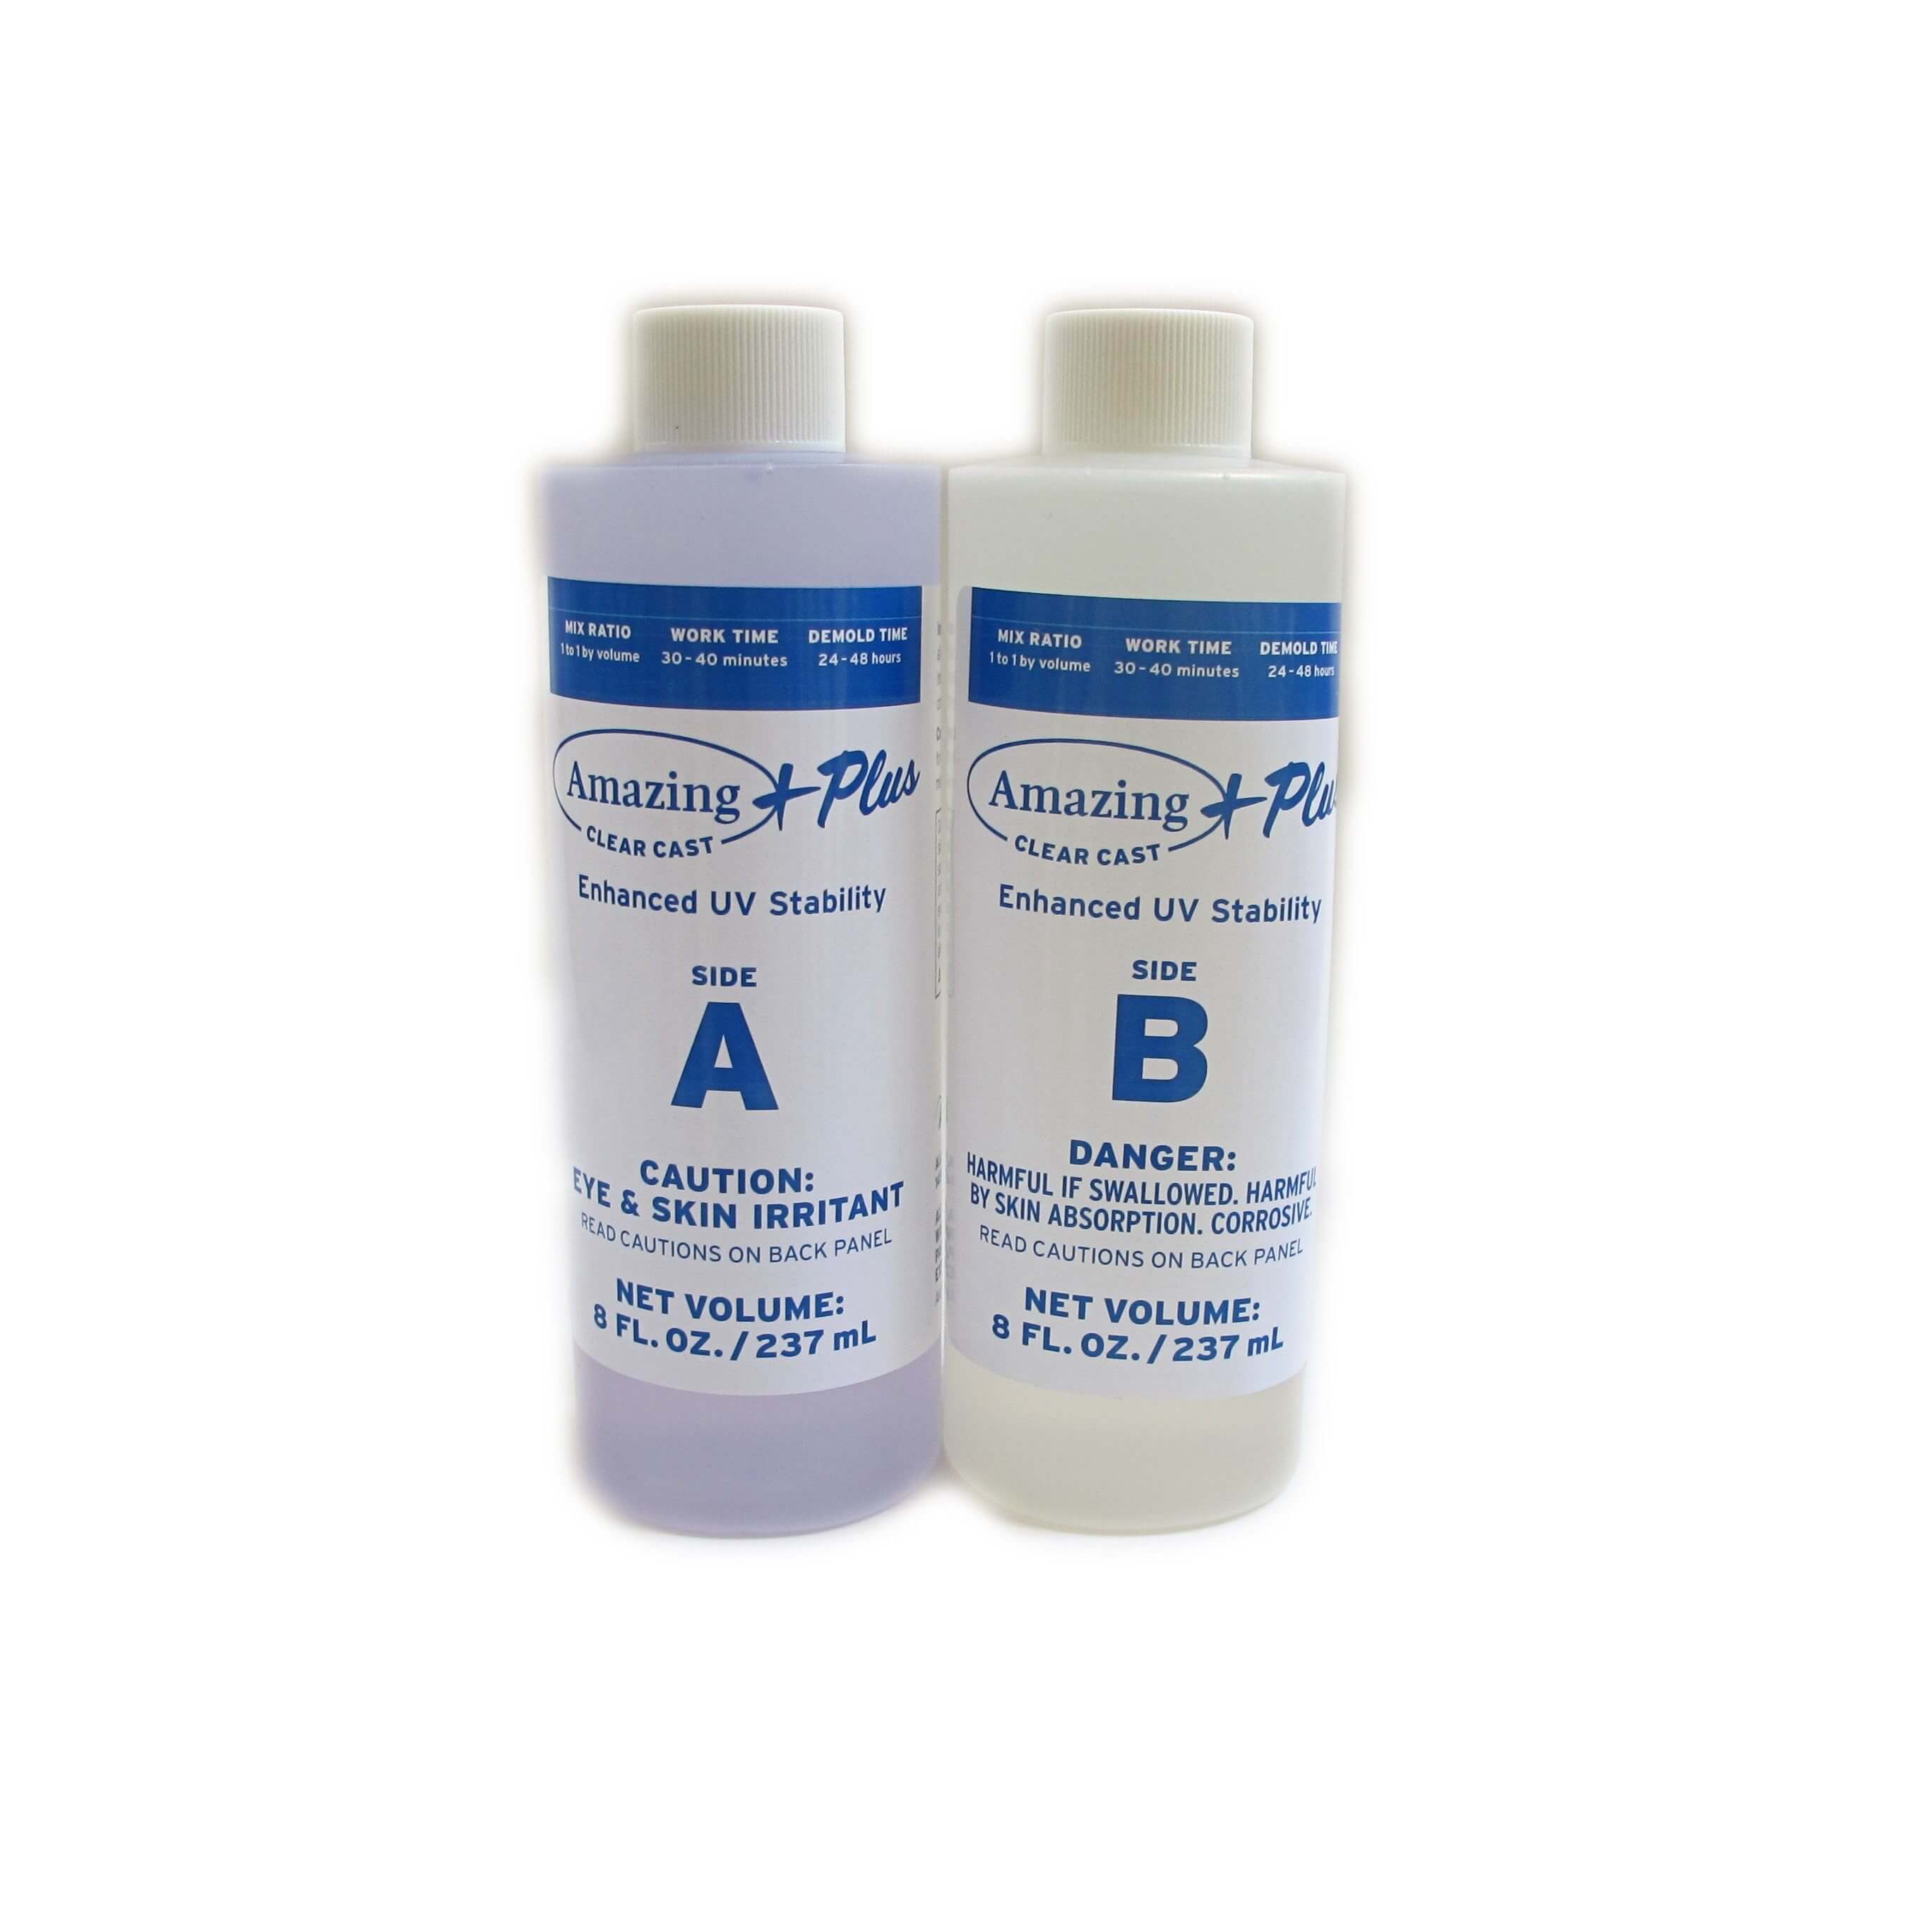 Alumilite Clear Epoxy Casting Compound - Quick Curing Formula - FDA  Compliant - 1 Pack in the Craft Supplies department at